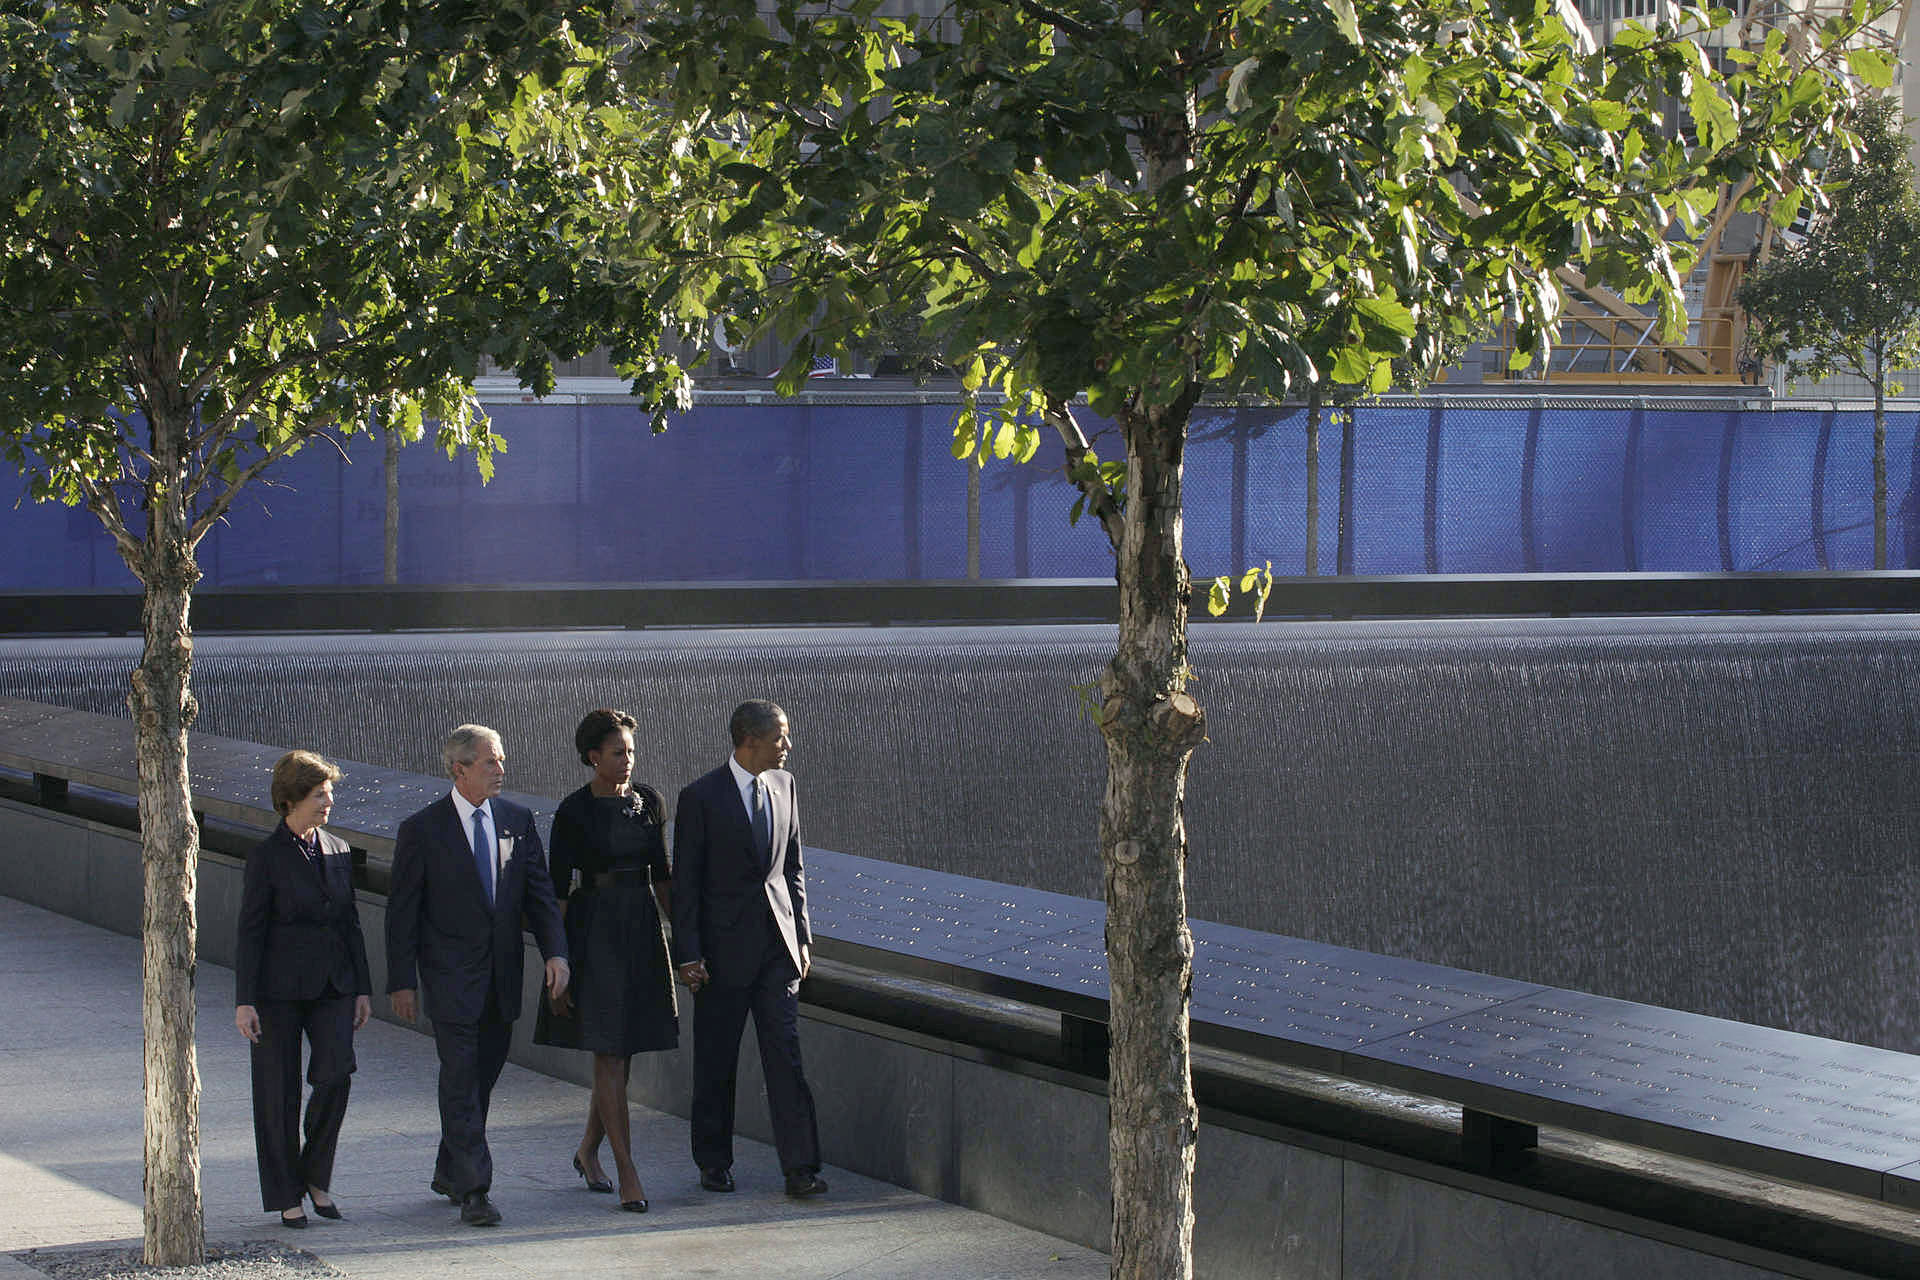 President Obama and First Lady Join Services to Commemorate Tenth Anniversary of 9/11